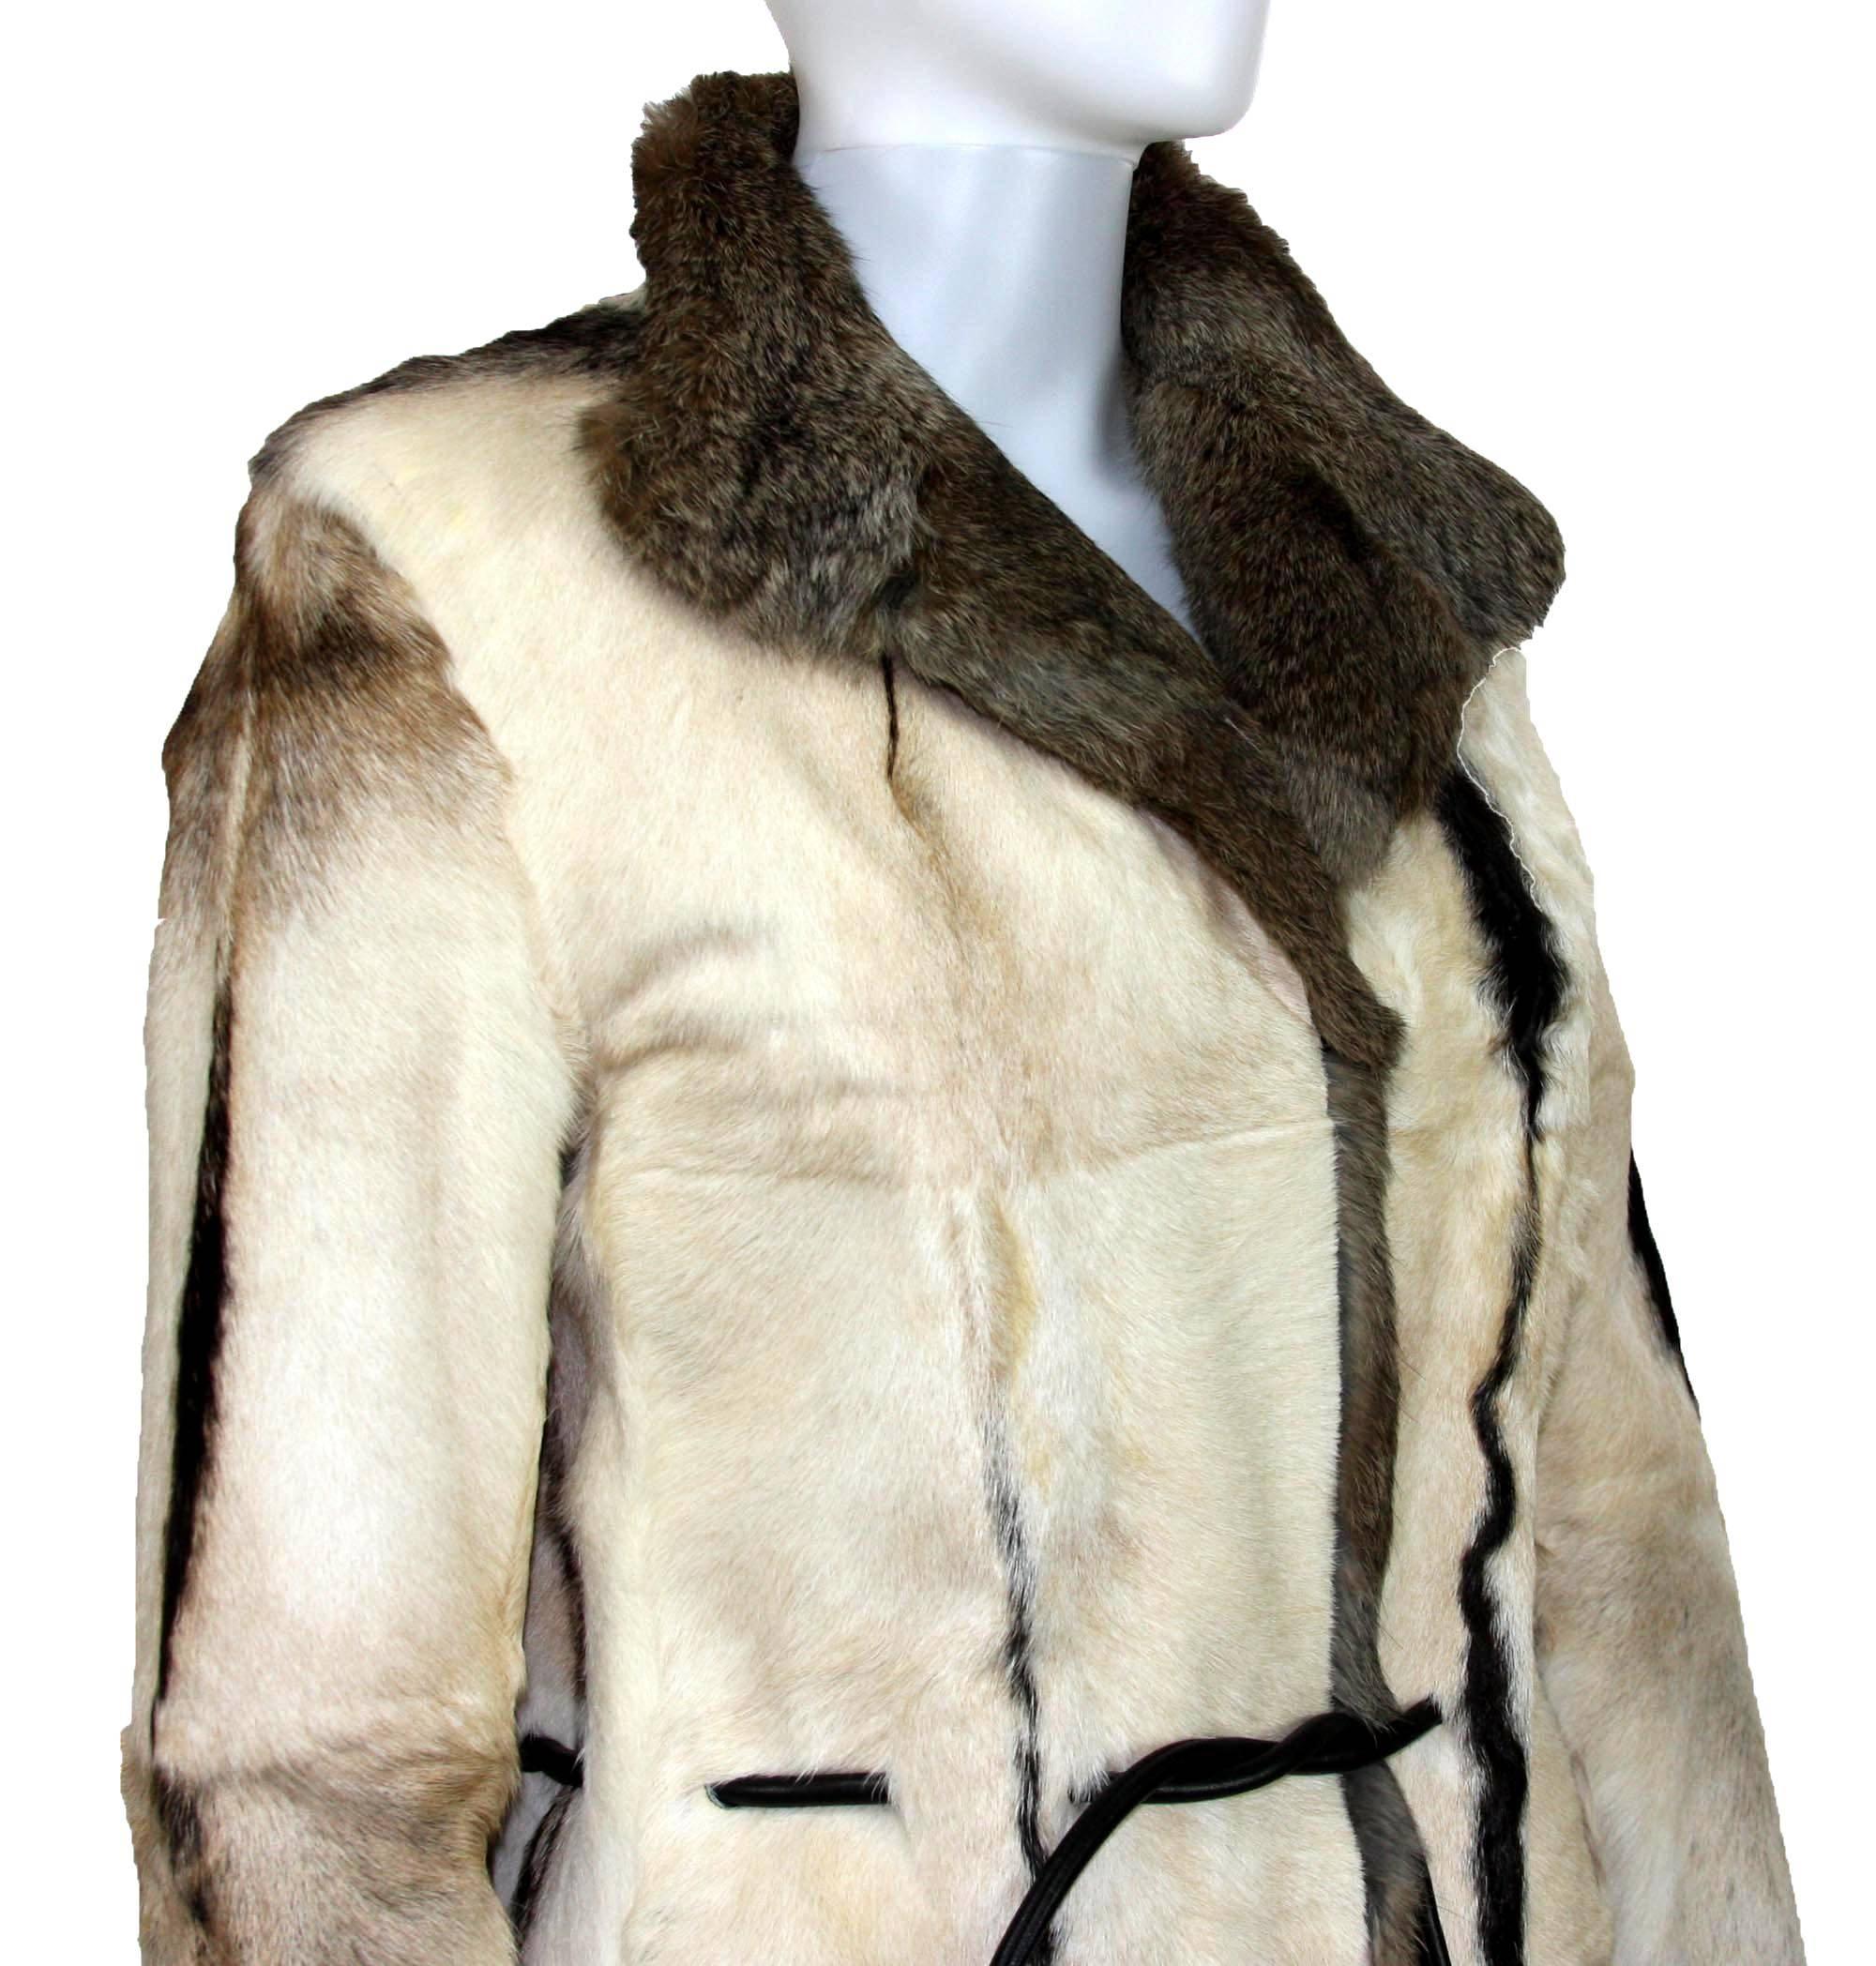 Tom Ford for Gucci Reversible Beige Fur Coat It.40 3